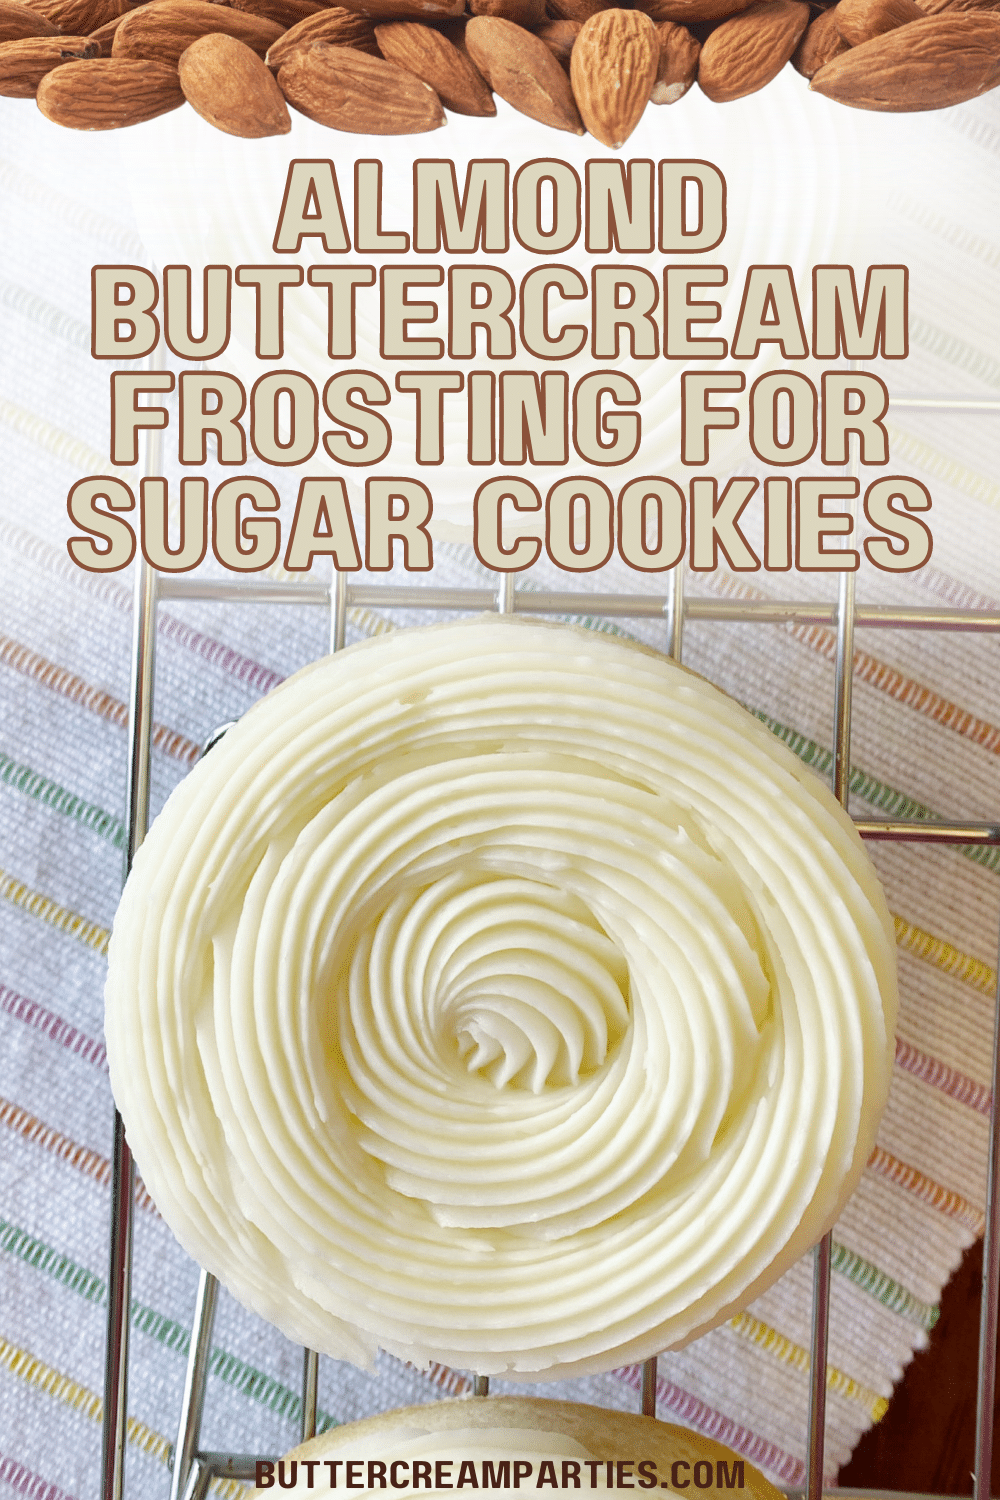 Almond Buttercream Frosting Recipe for Sugar Cookies